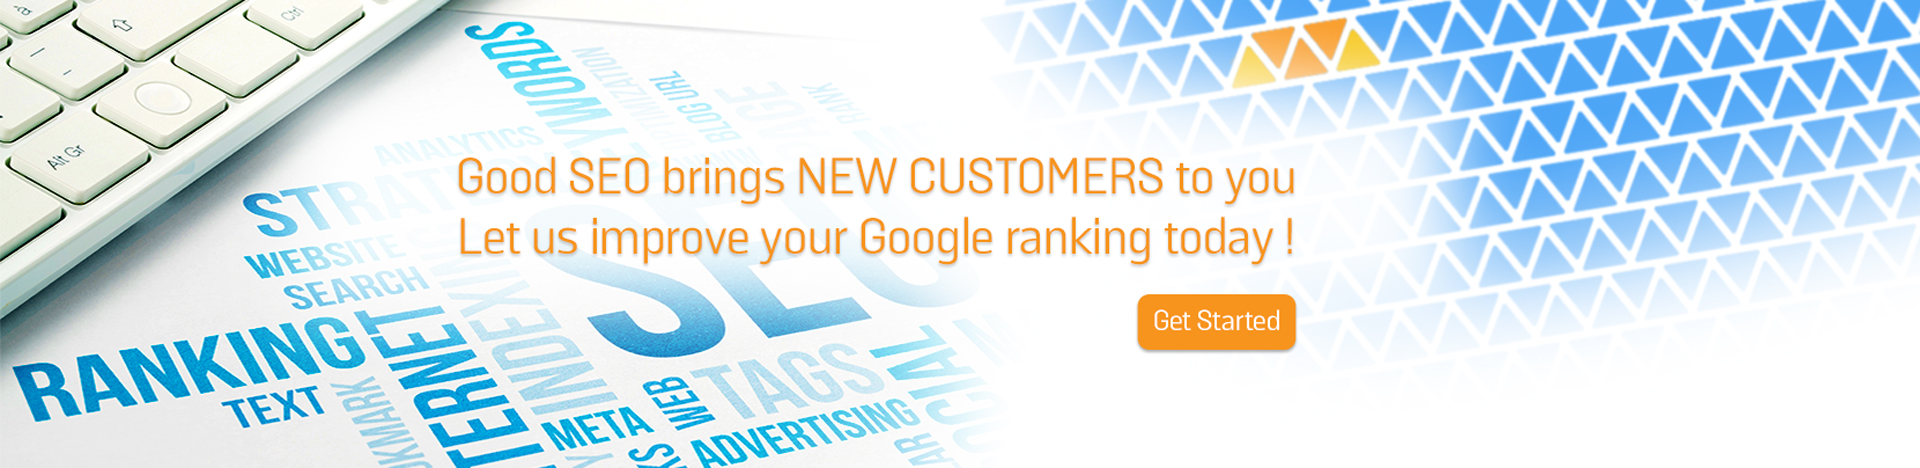 Good SEO brings new customers to you.